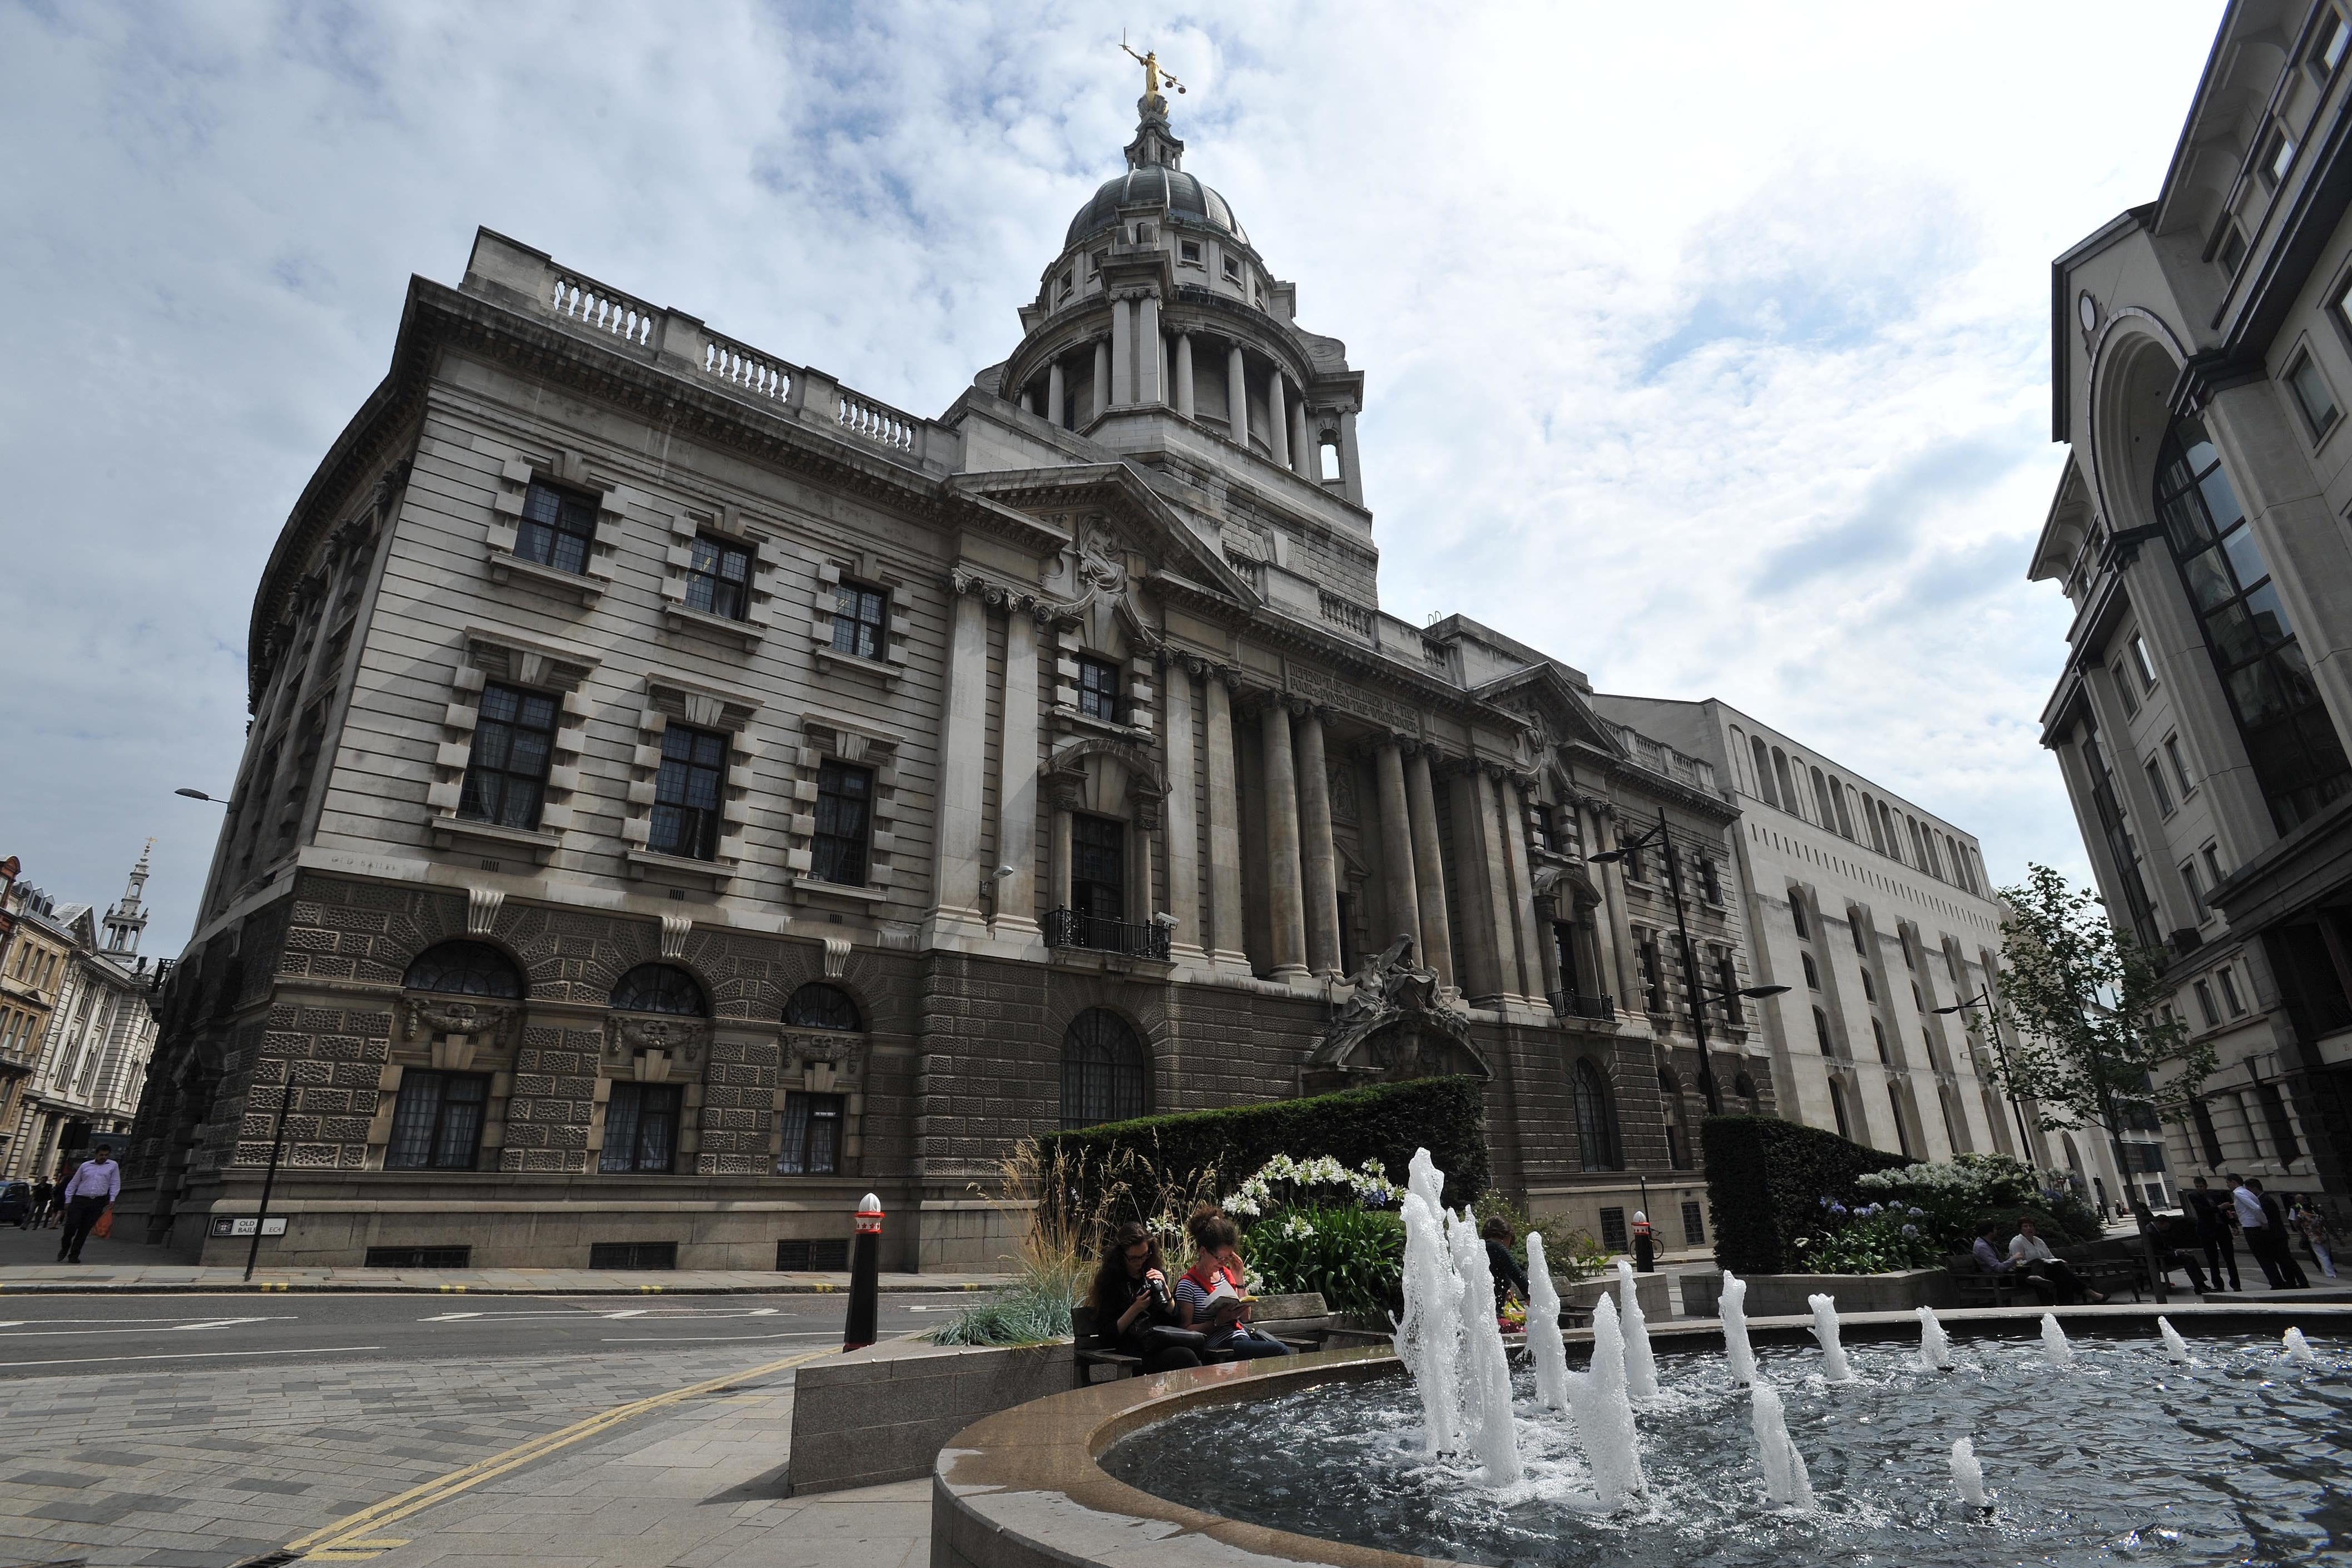 The Central Criminal Court also referred to as the Old Bailey, on Old Bailey, central London (Nick Ansell/PA)